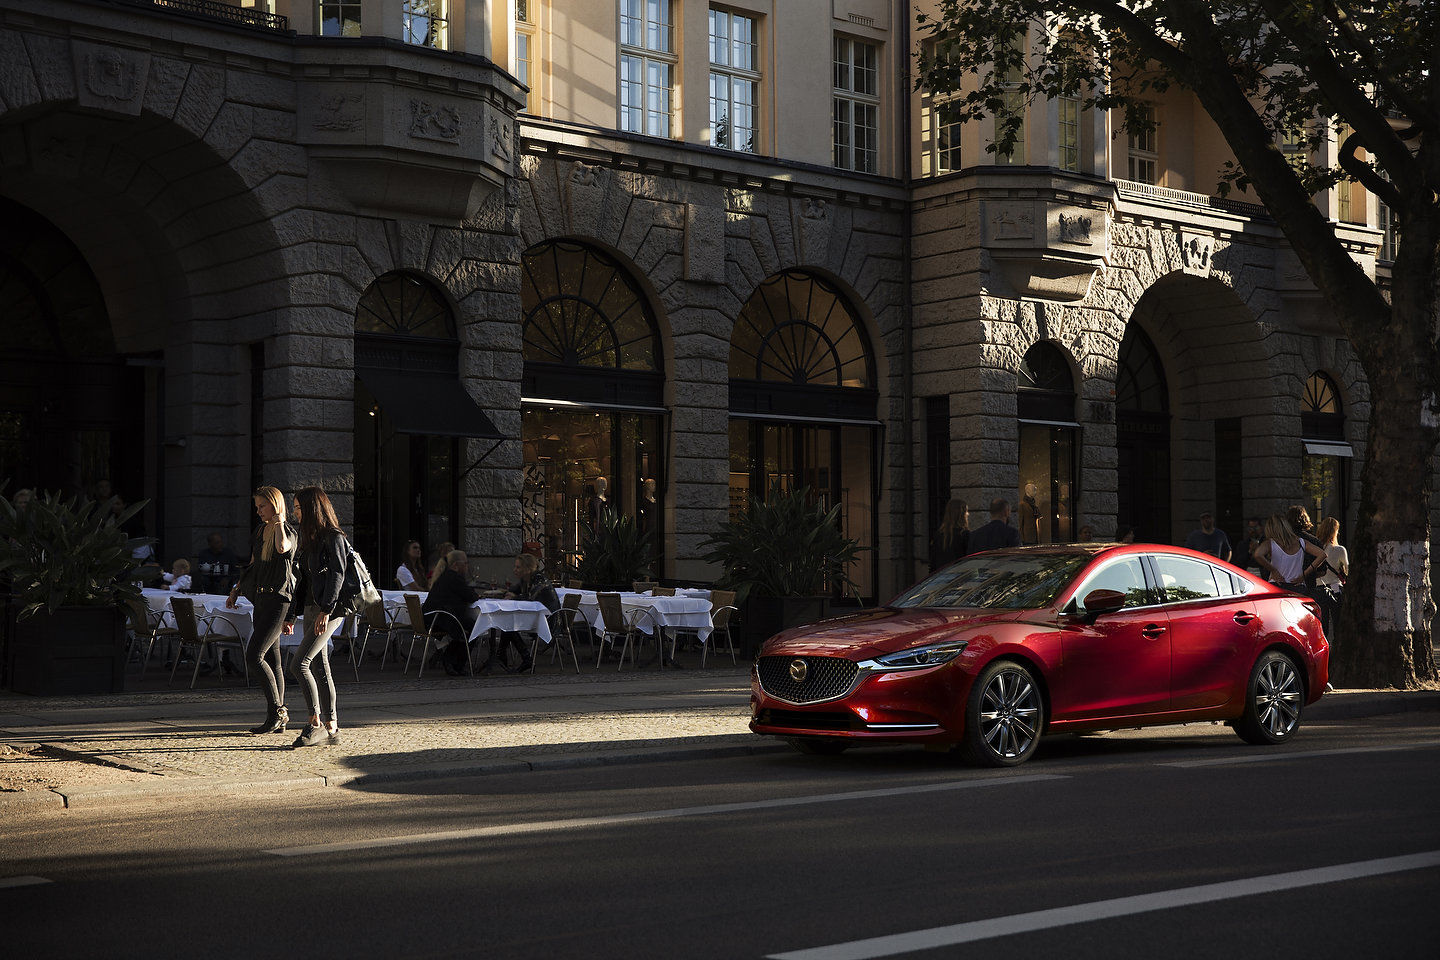 The 2019 Mazda6: The sedan lives on at Mazda and it is quite a sight to behold